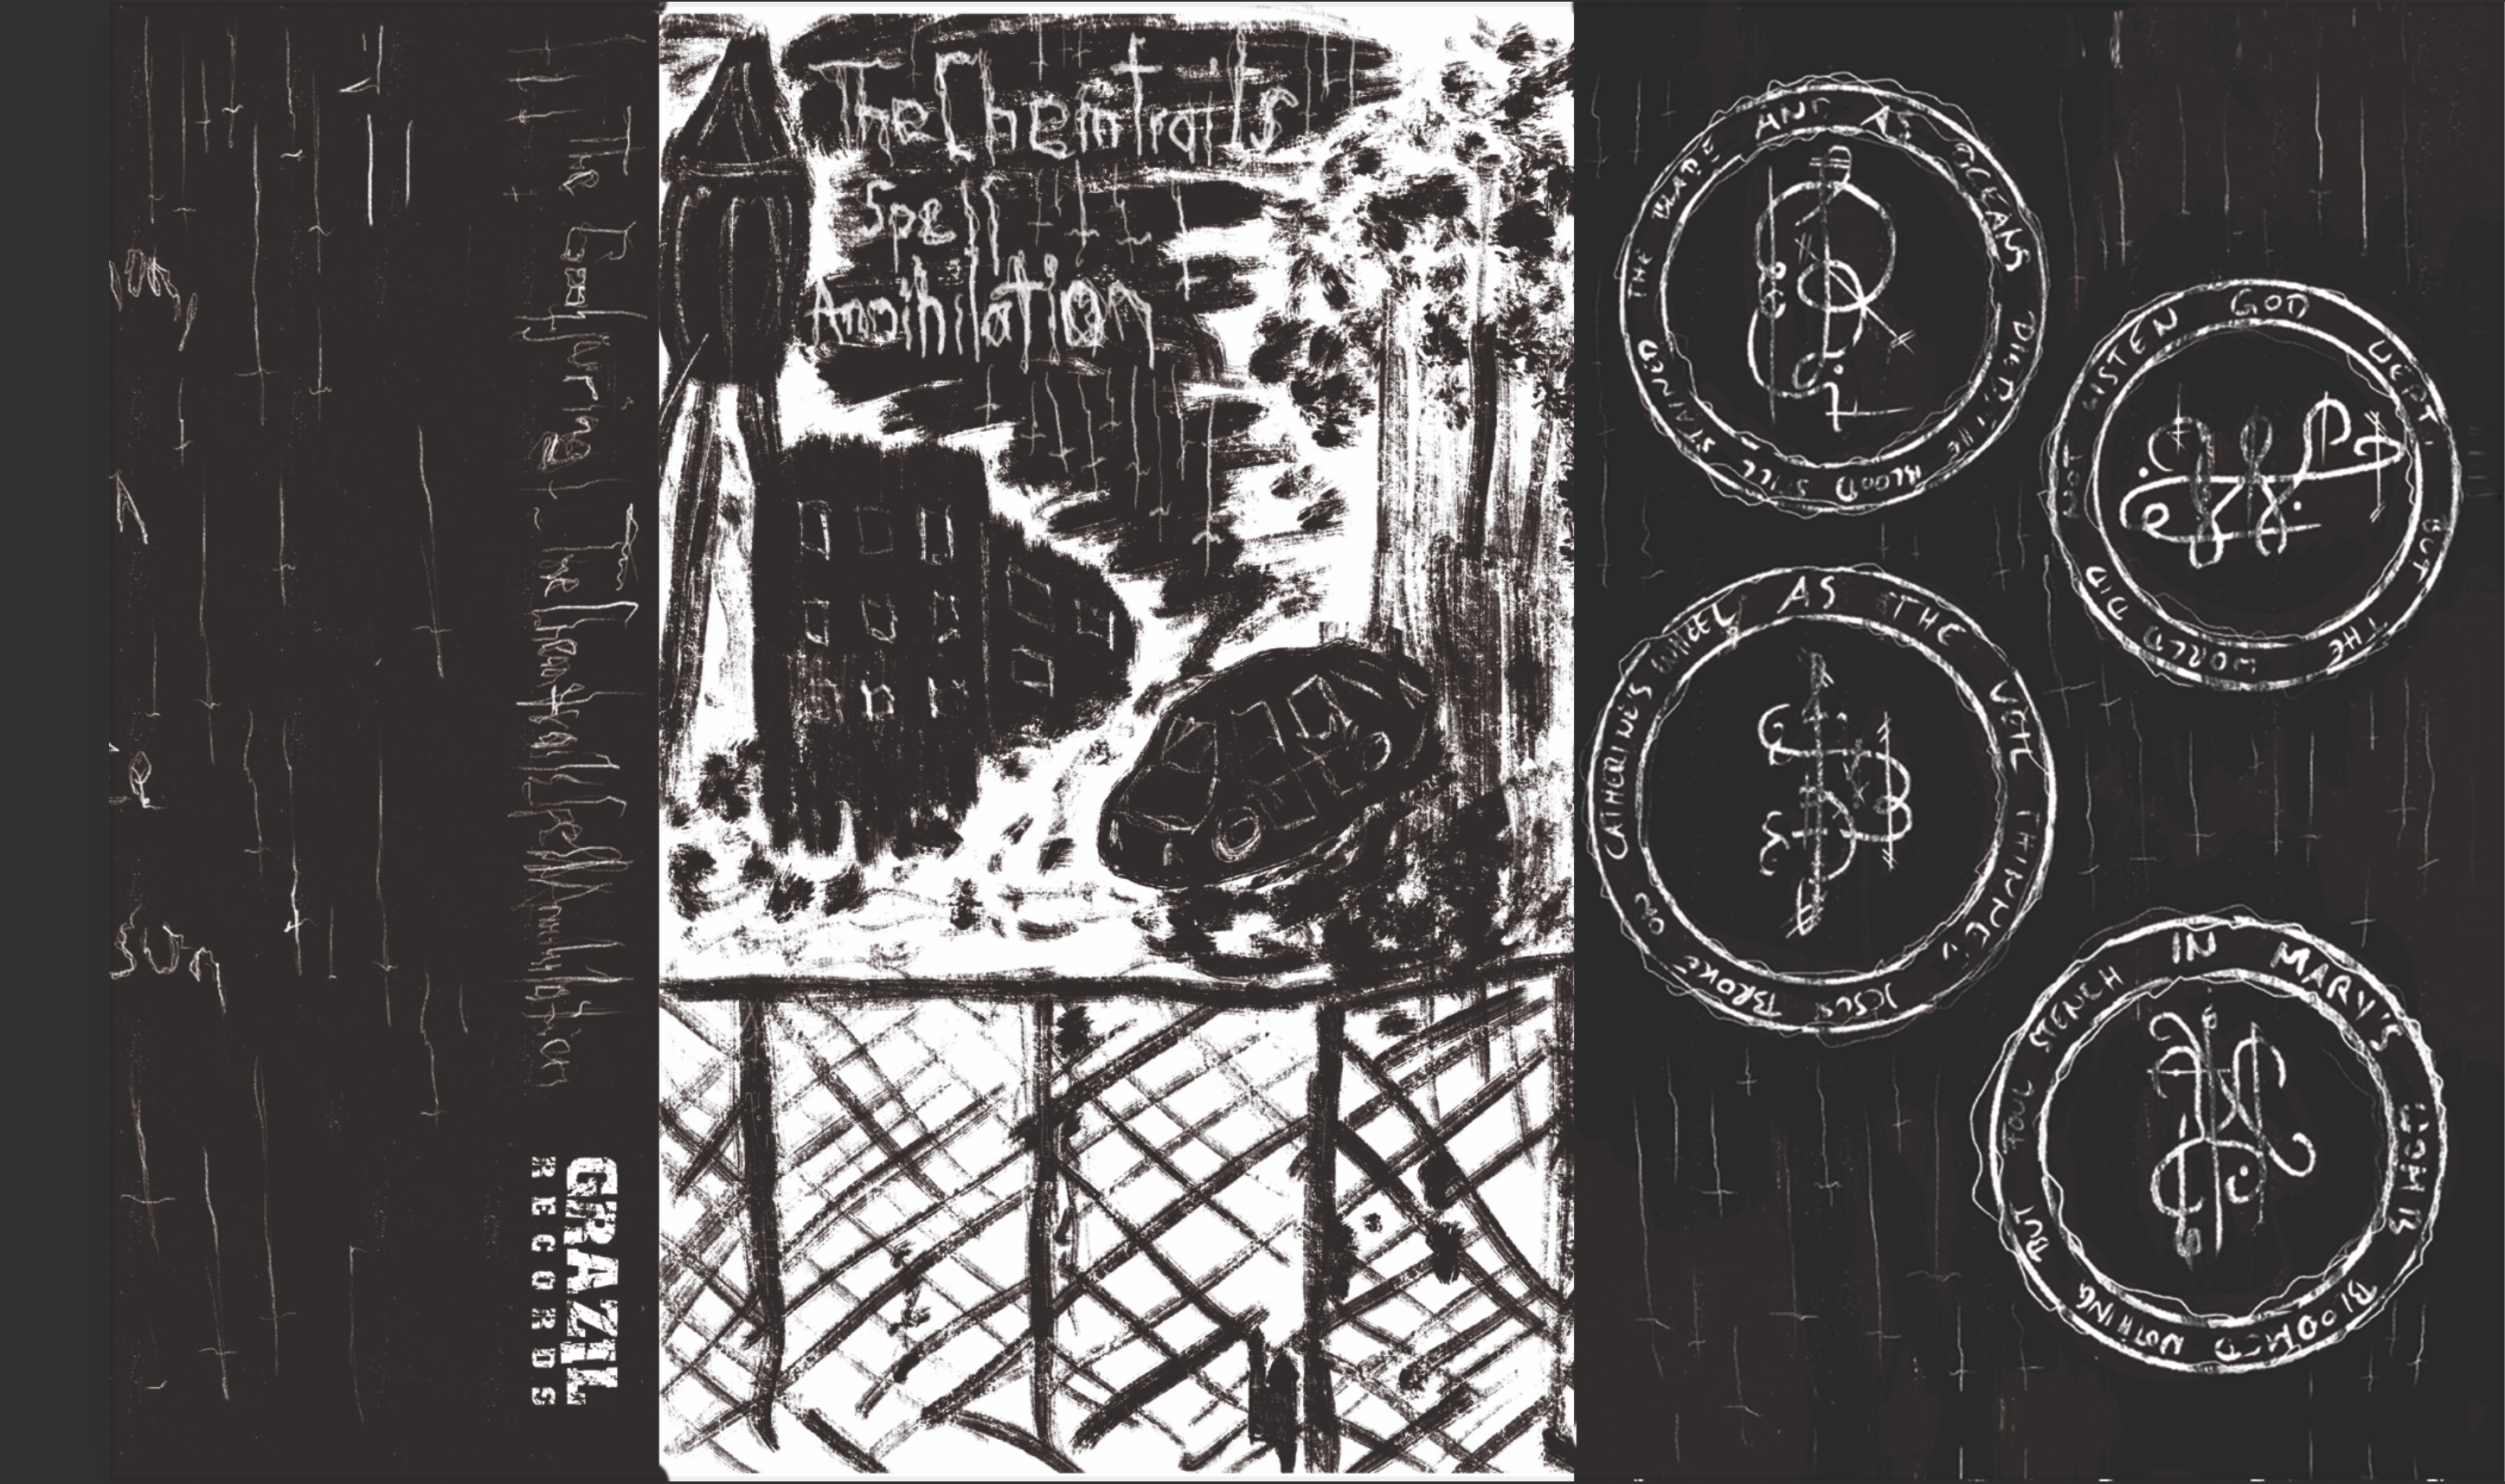 GZ049 The Goatjuring – The Chemtrails Spell Annihilation (Tape) grazil Records